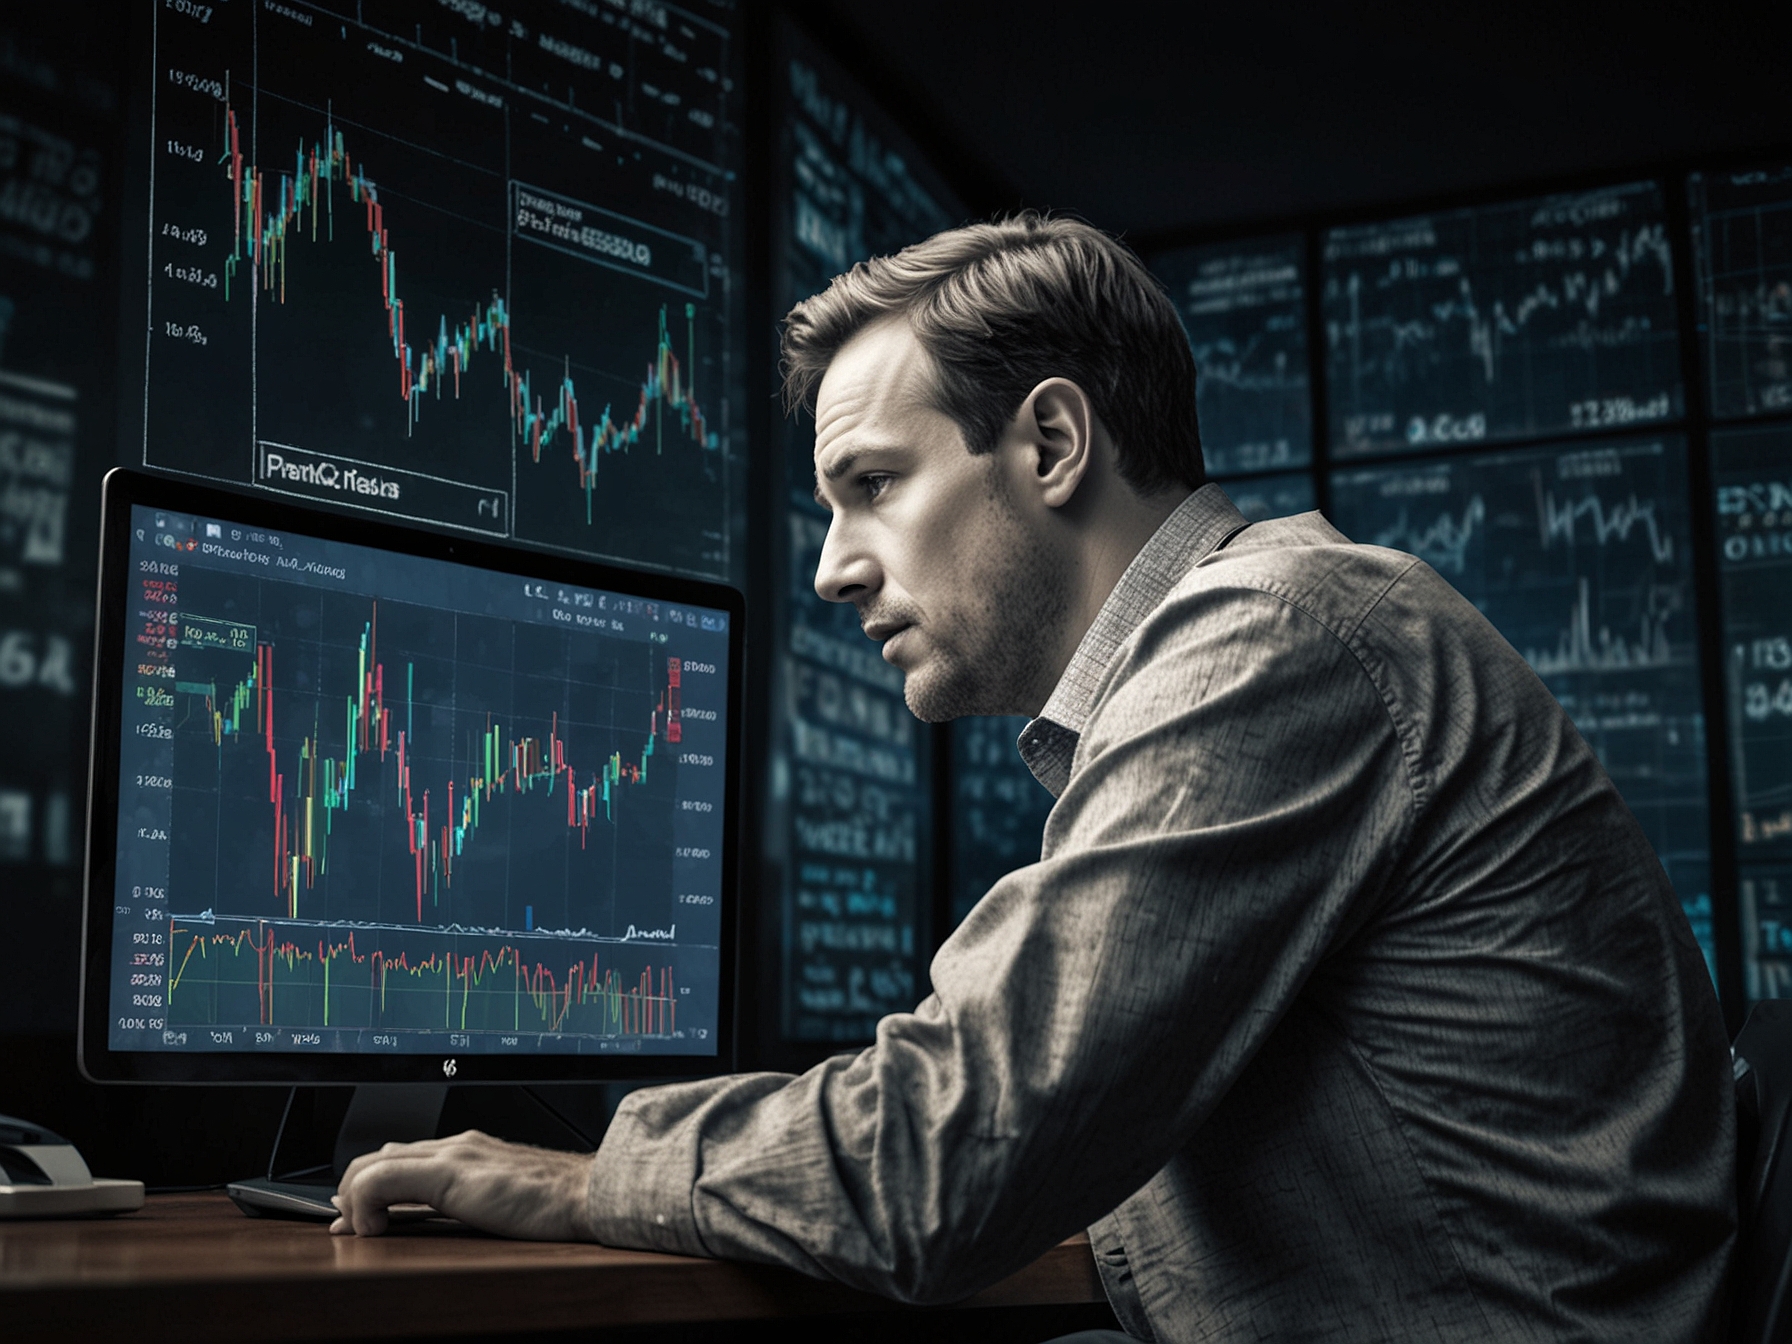 An illustration showing a tech founder considering private funding options instead of IPO, with a backdrop of fluctuating stock market graphs.